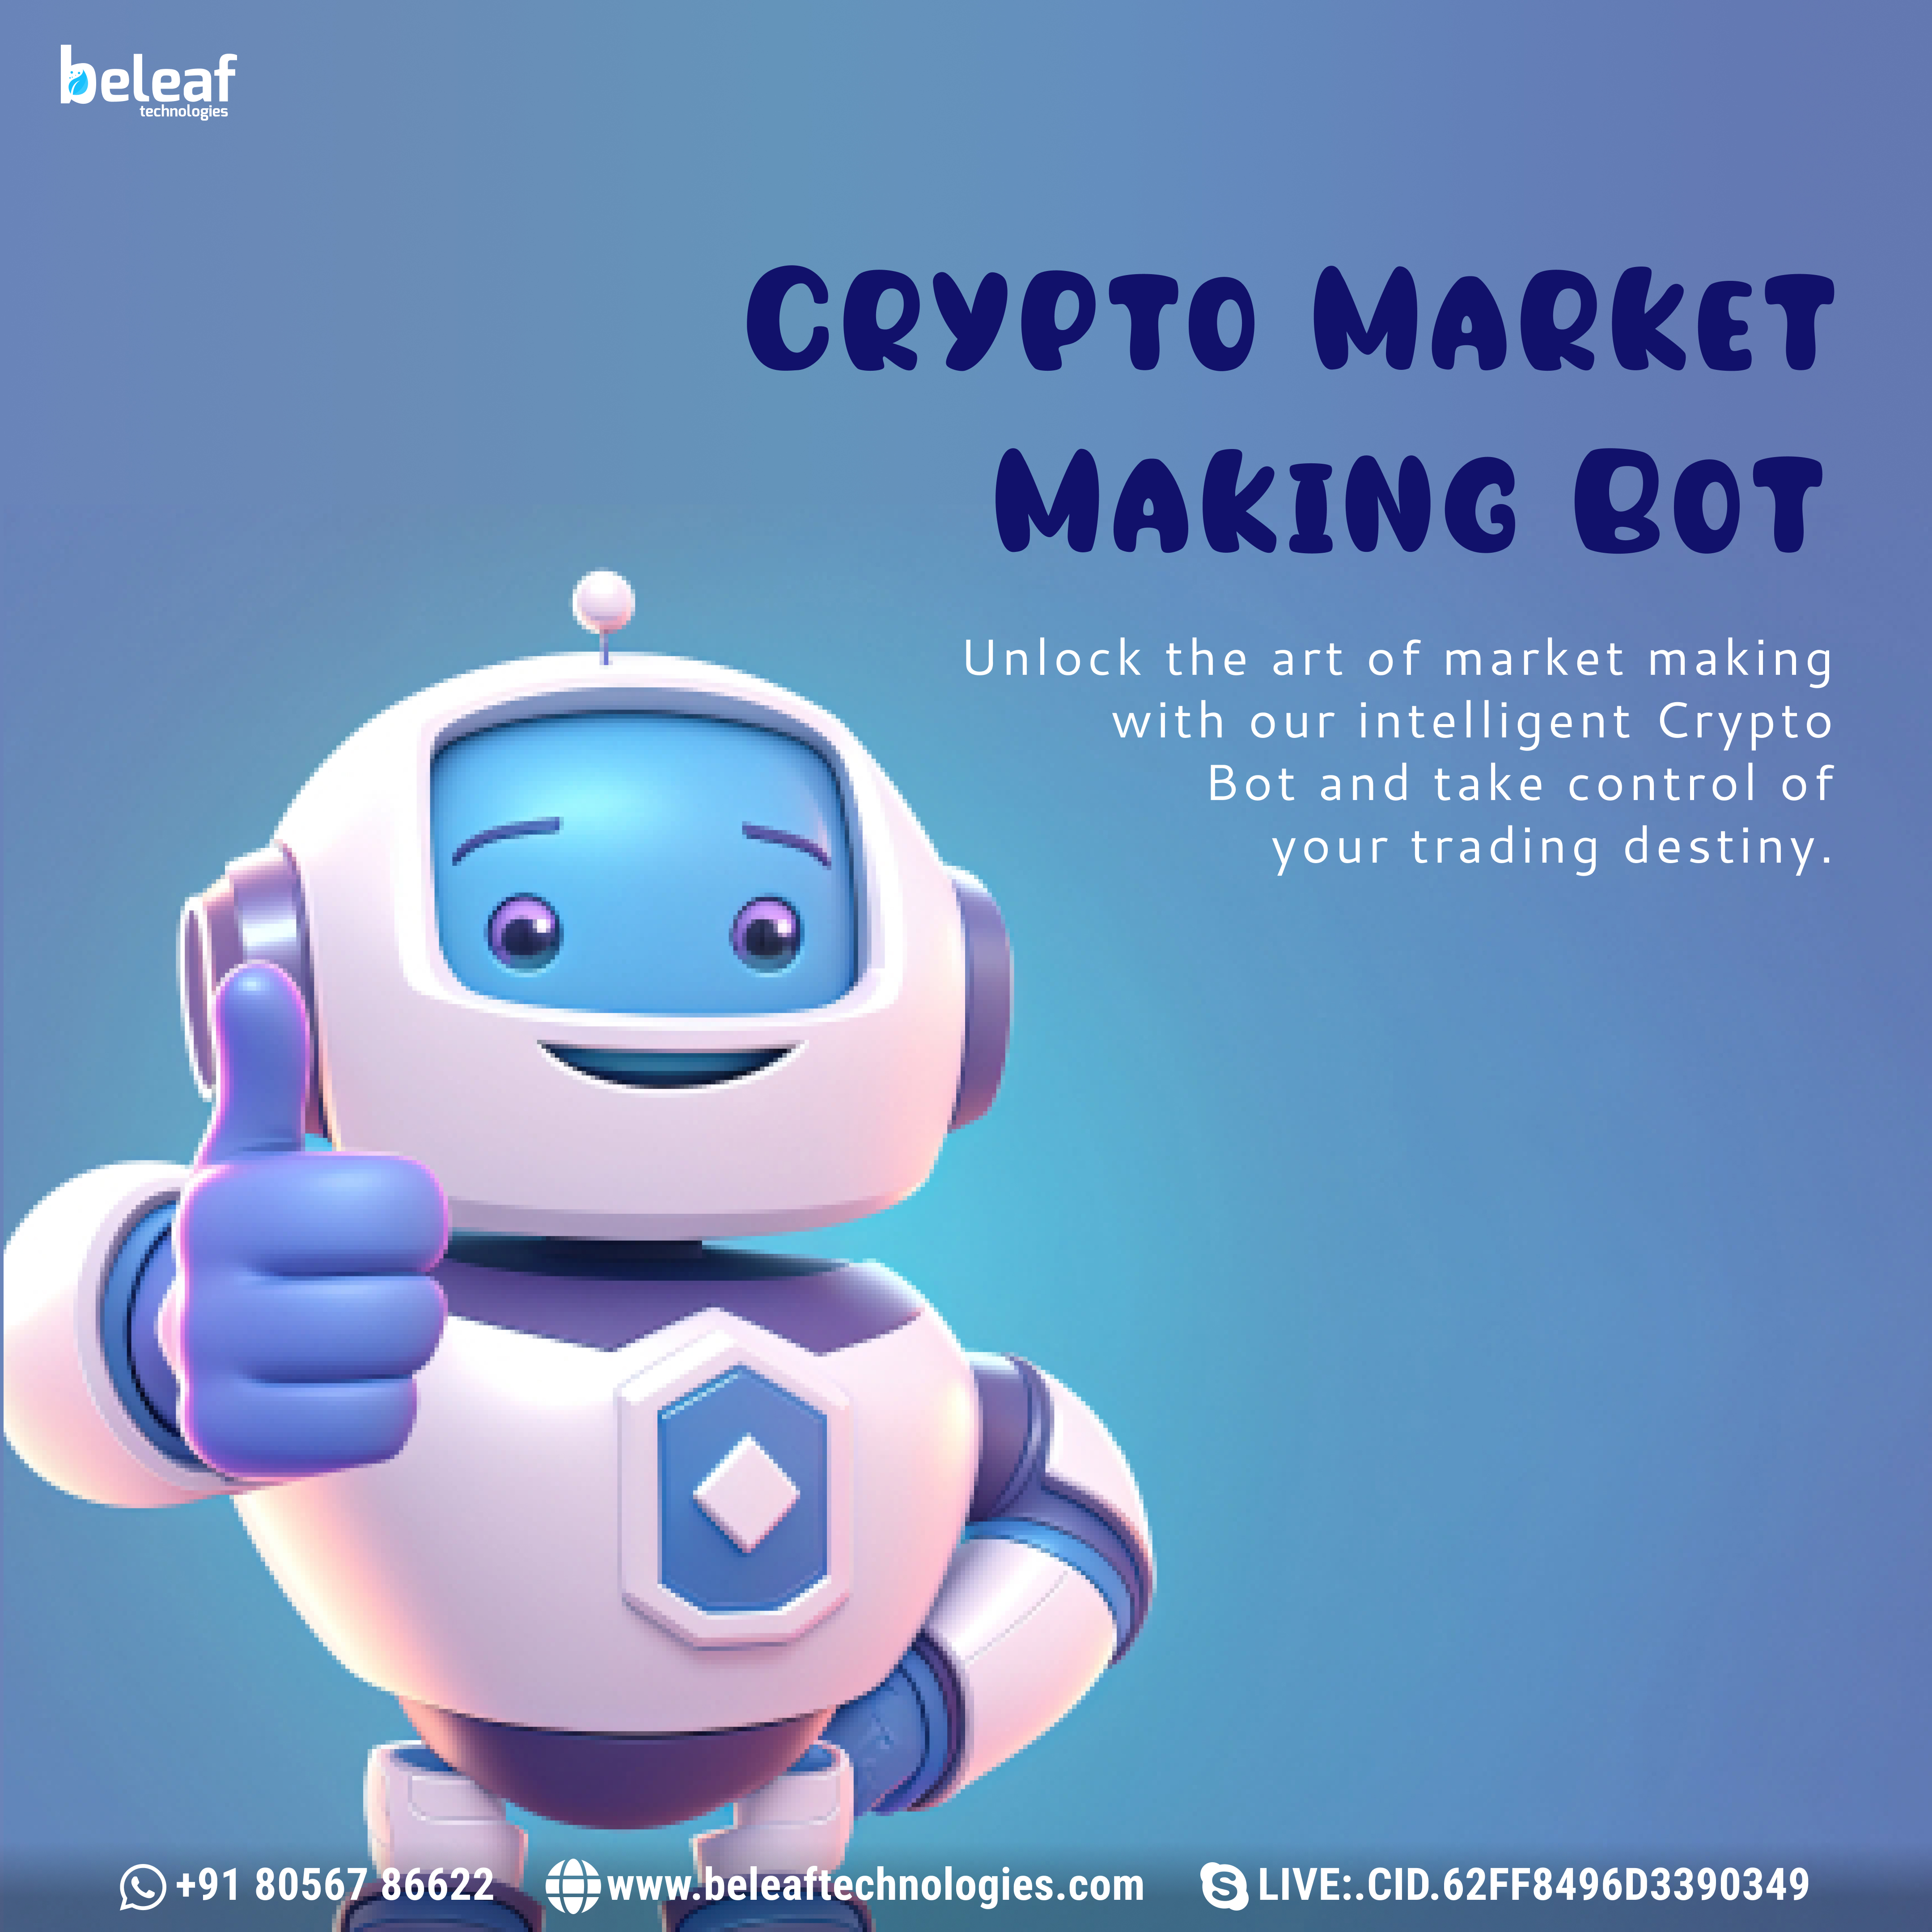 Unlock the art of market making
with our intelligent Crypto
Bot and take control of

your trading destiny.

 
  
   

(O +91 80567 86622 &mswww.beleaftechnologies.com € LIVE:.CID.62FF8496D3390349

A\ /4